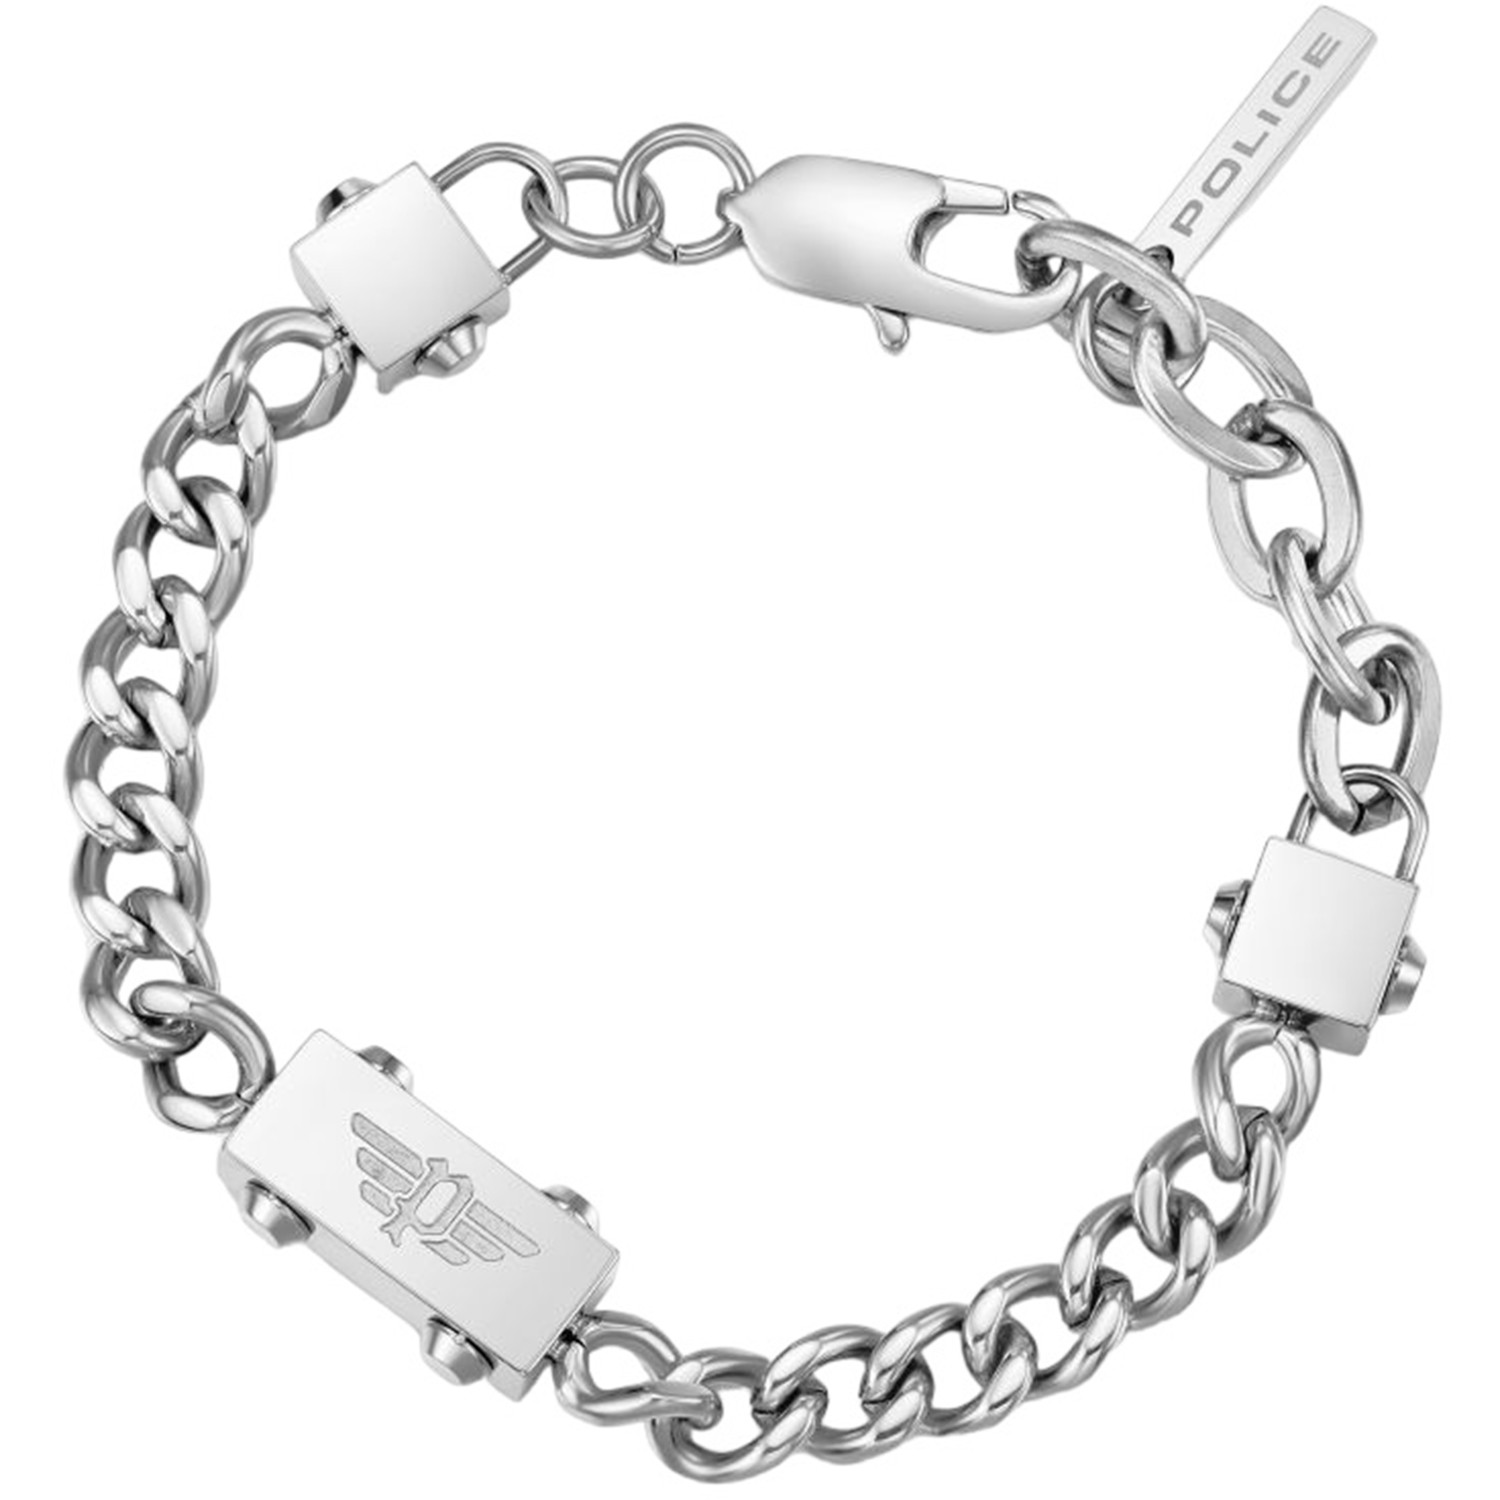 Police Men's Bracelets Police Men's Bracelets CHAINED PEAGB0002102  Stainless Steel Silver PEAGB0002102 | Comprar Bracelets Police Men's  Bracelets CHAINED PEAGB0002102 Stainless Steel Silver Barato |  Clicktime.eu» Comprar online